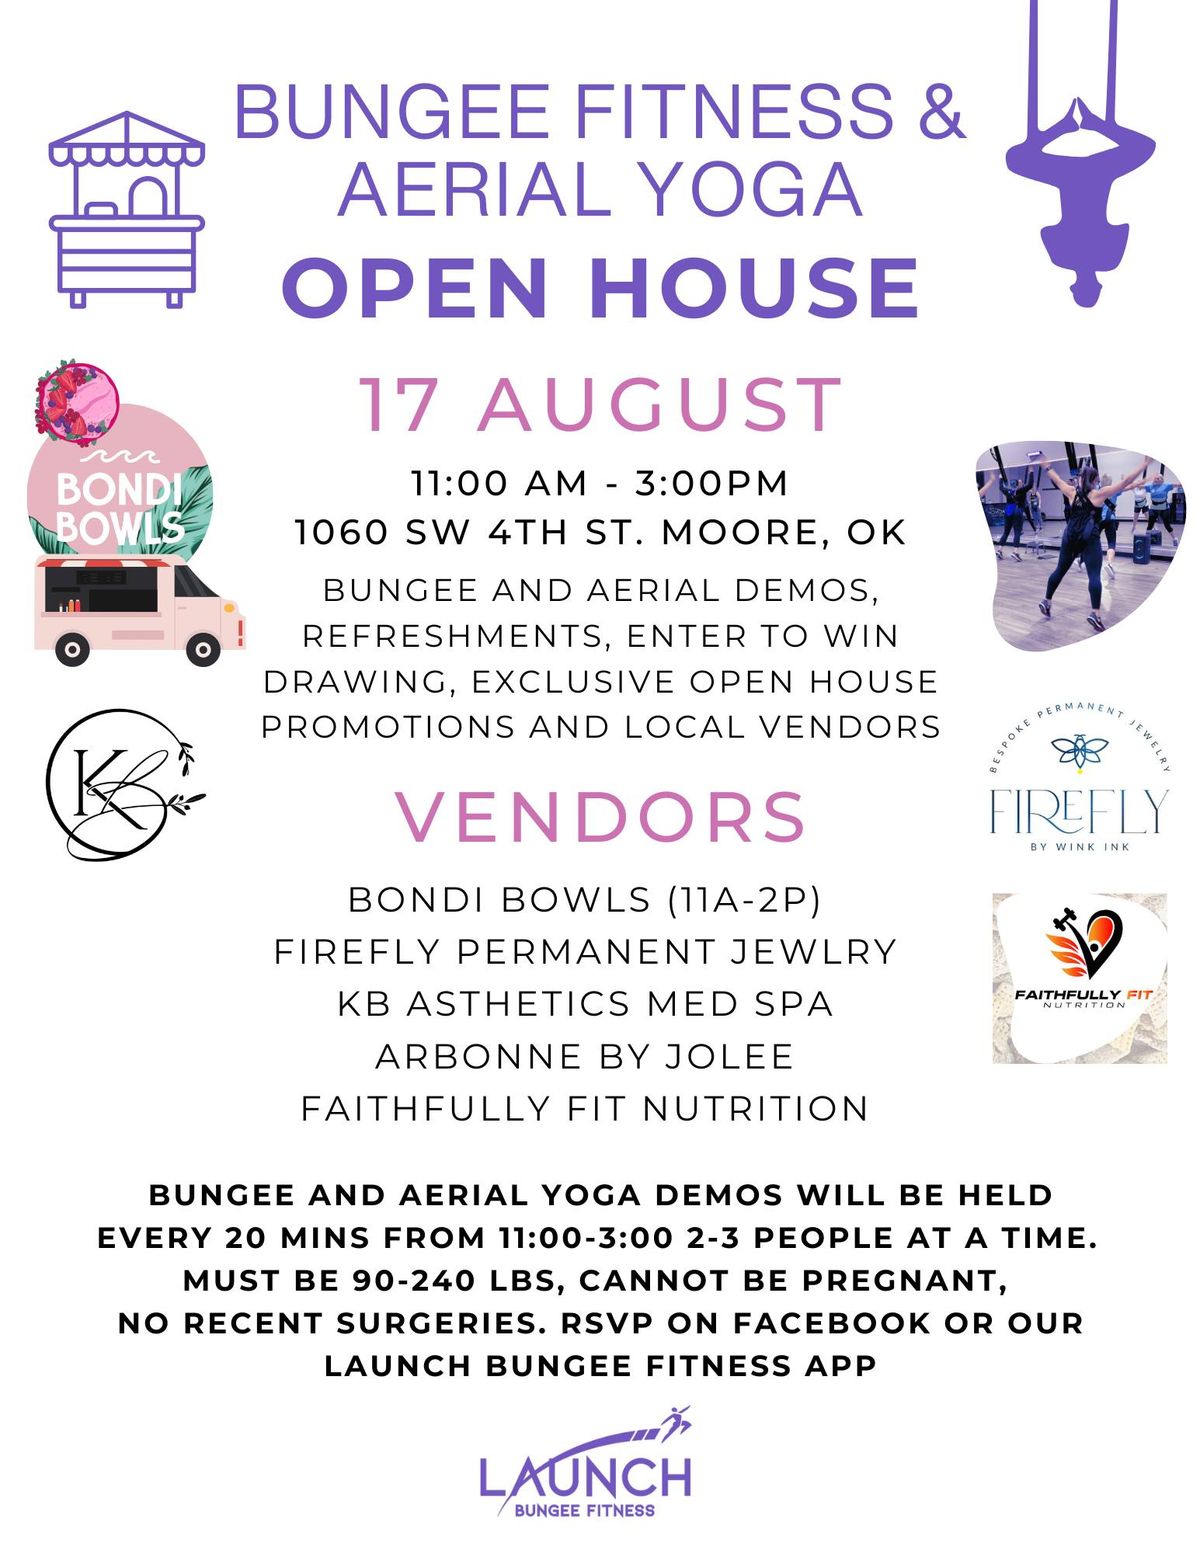 OPEN HOUSE - Bungee Fitness and Aerial Yoga 